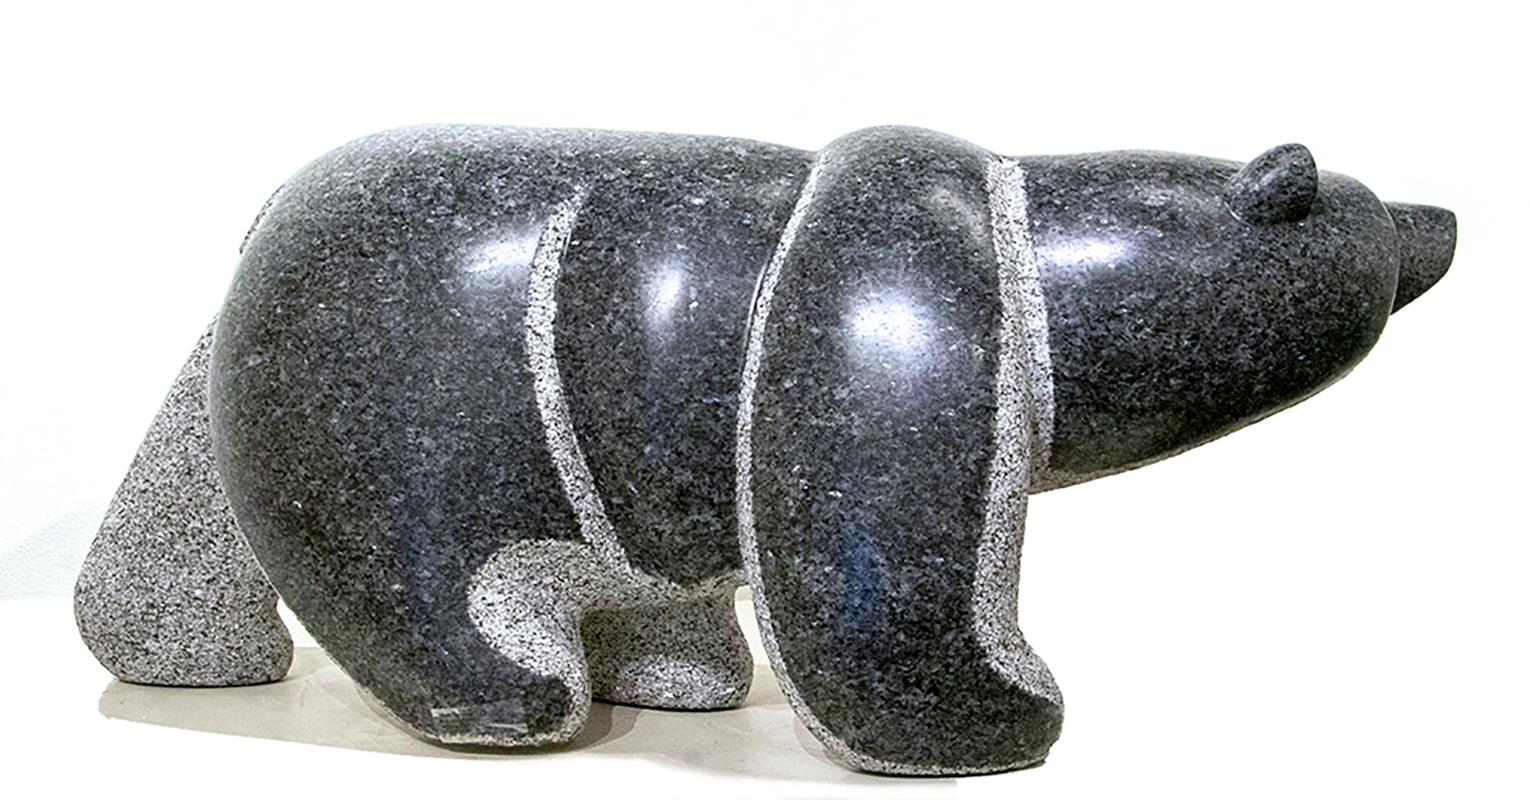 BLUE PEARL GRANITE

Stewart Steinhauer’s sculptures are carved out of a variety of granites, using a combination of tooling ranging from carbide-tipped chisel and mallet to hand held power cutting and polishing equipment. A band member at Saddle